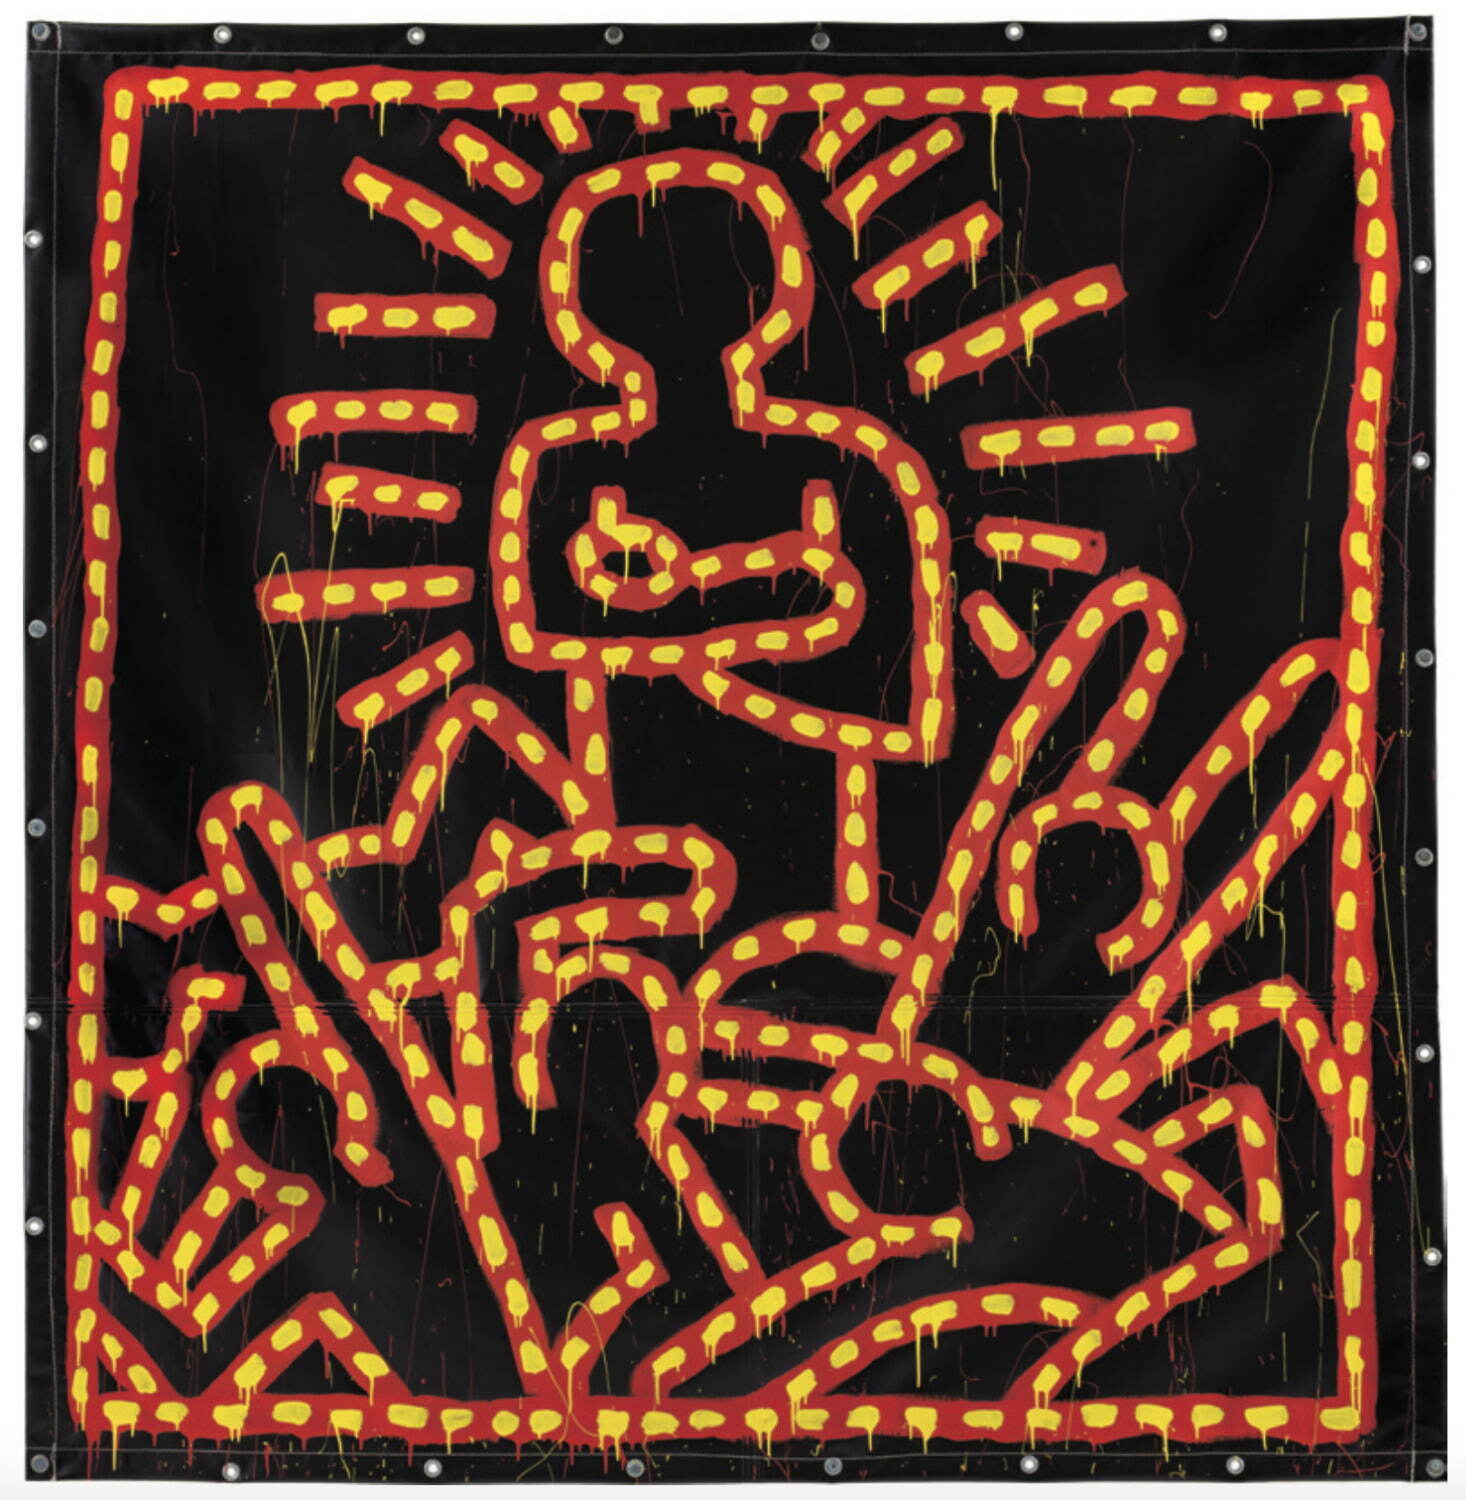 Untitled (KH.200), 1982, The Museum of Art, Kochi
All Keith Haring Artwork (C)Keith Haring Foundation
Courtesy of Nakamura Keith Haring Collection.